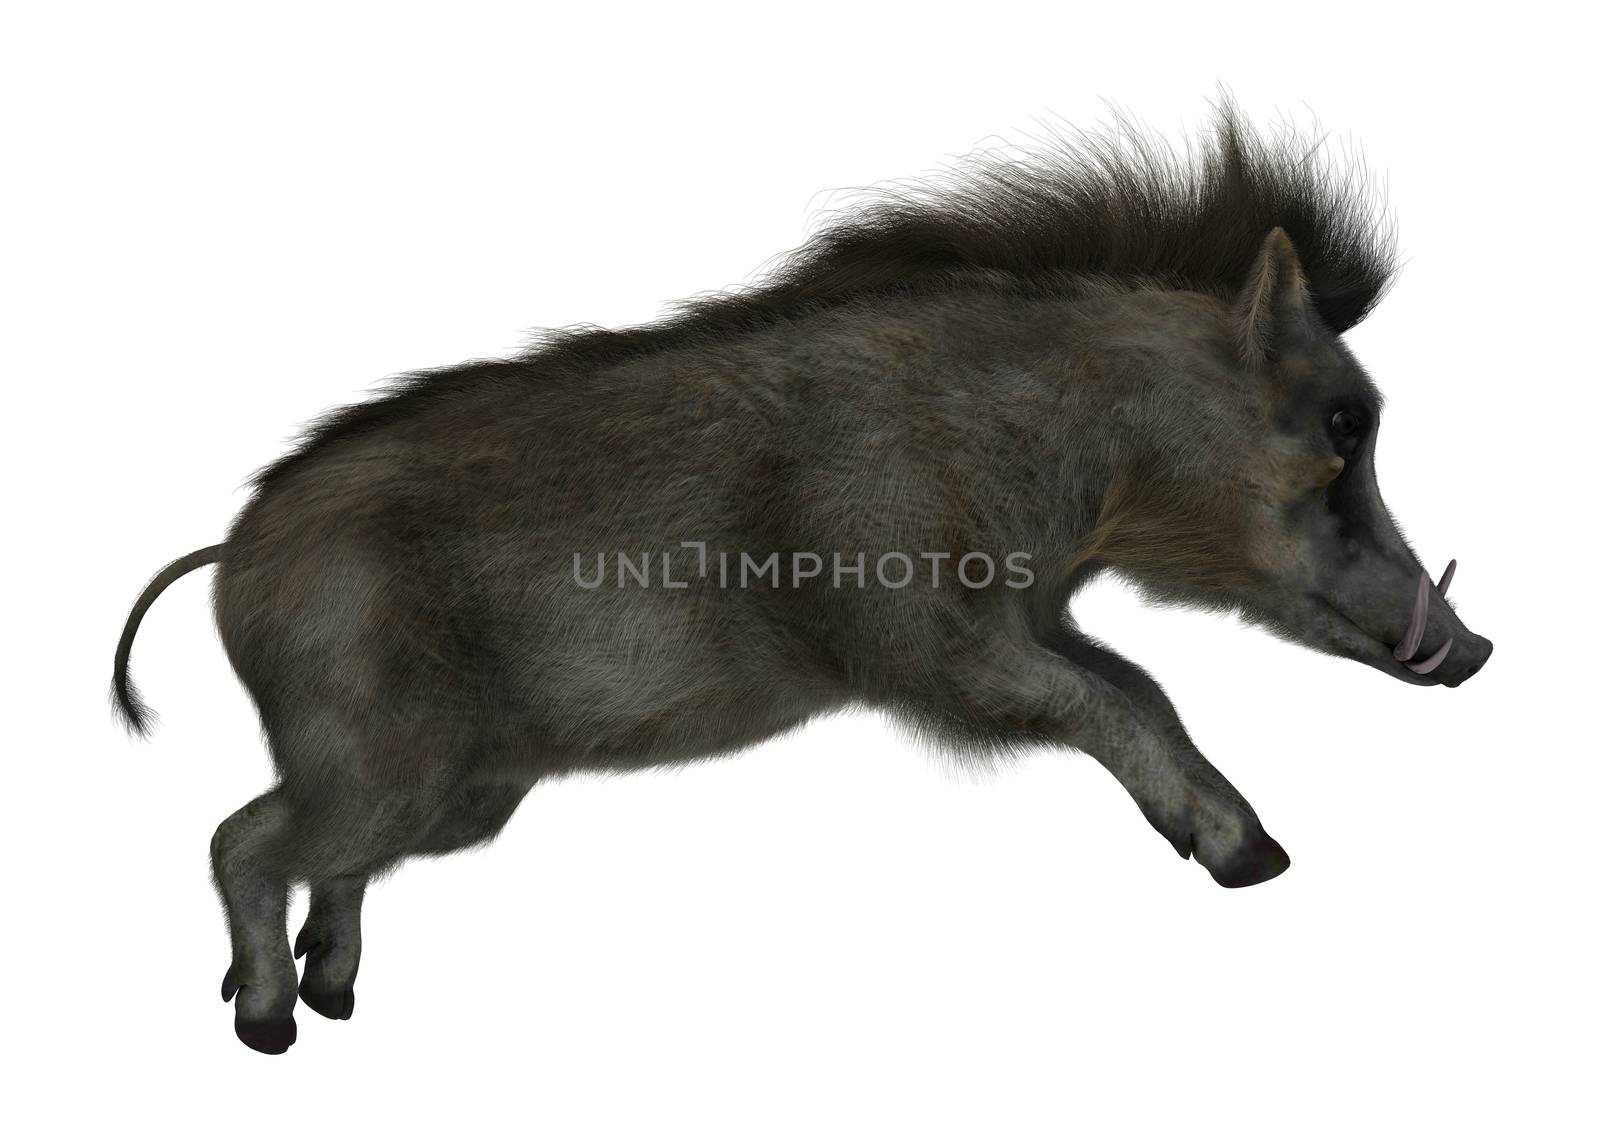 3D digital render of a warthog jumping isolated on white background